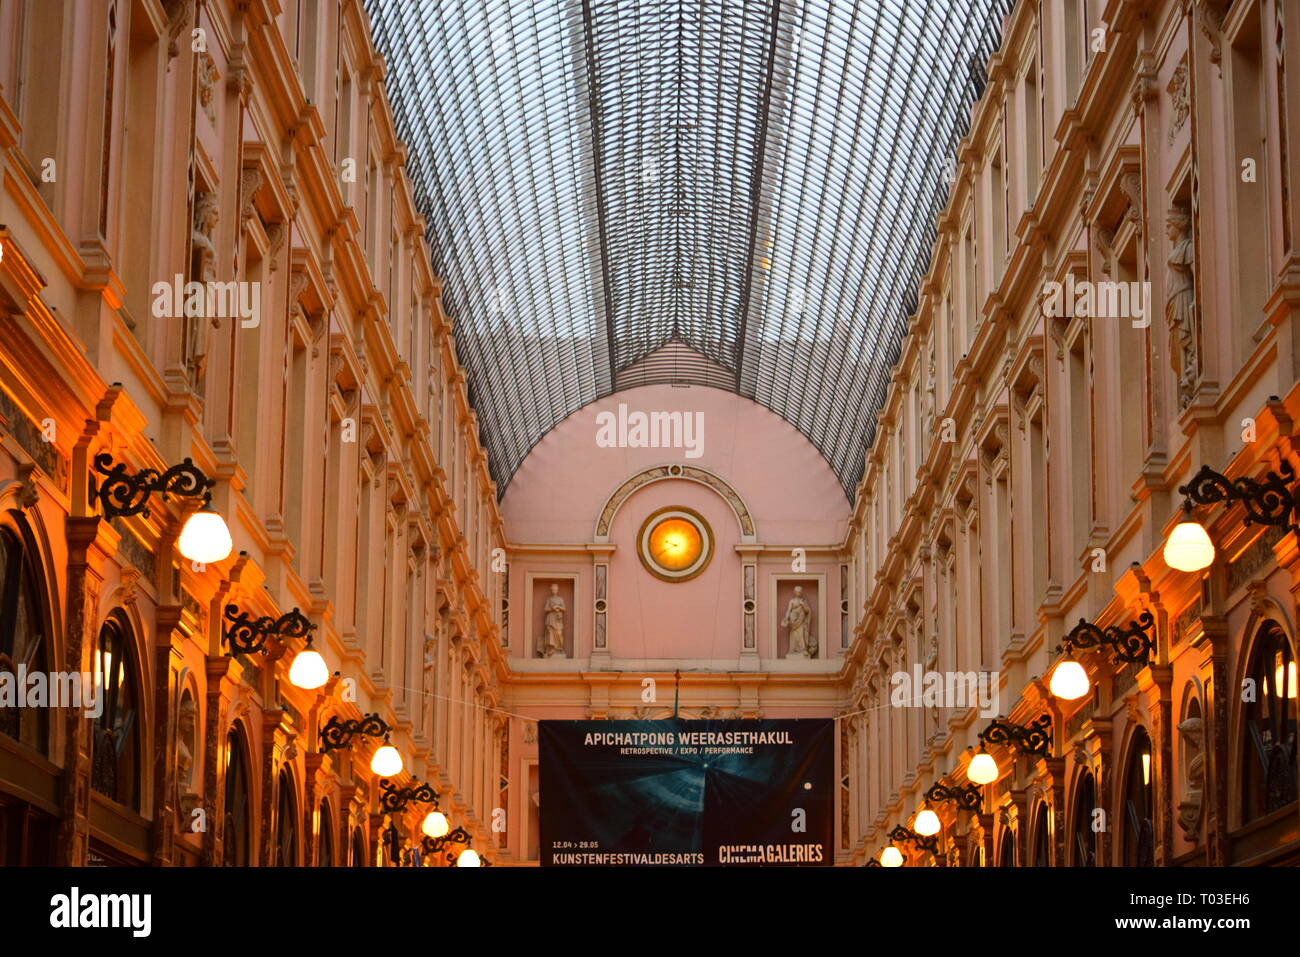 brussels - les galeries royales (next to grand place) 2016 Stock Photo